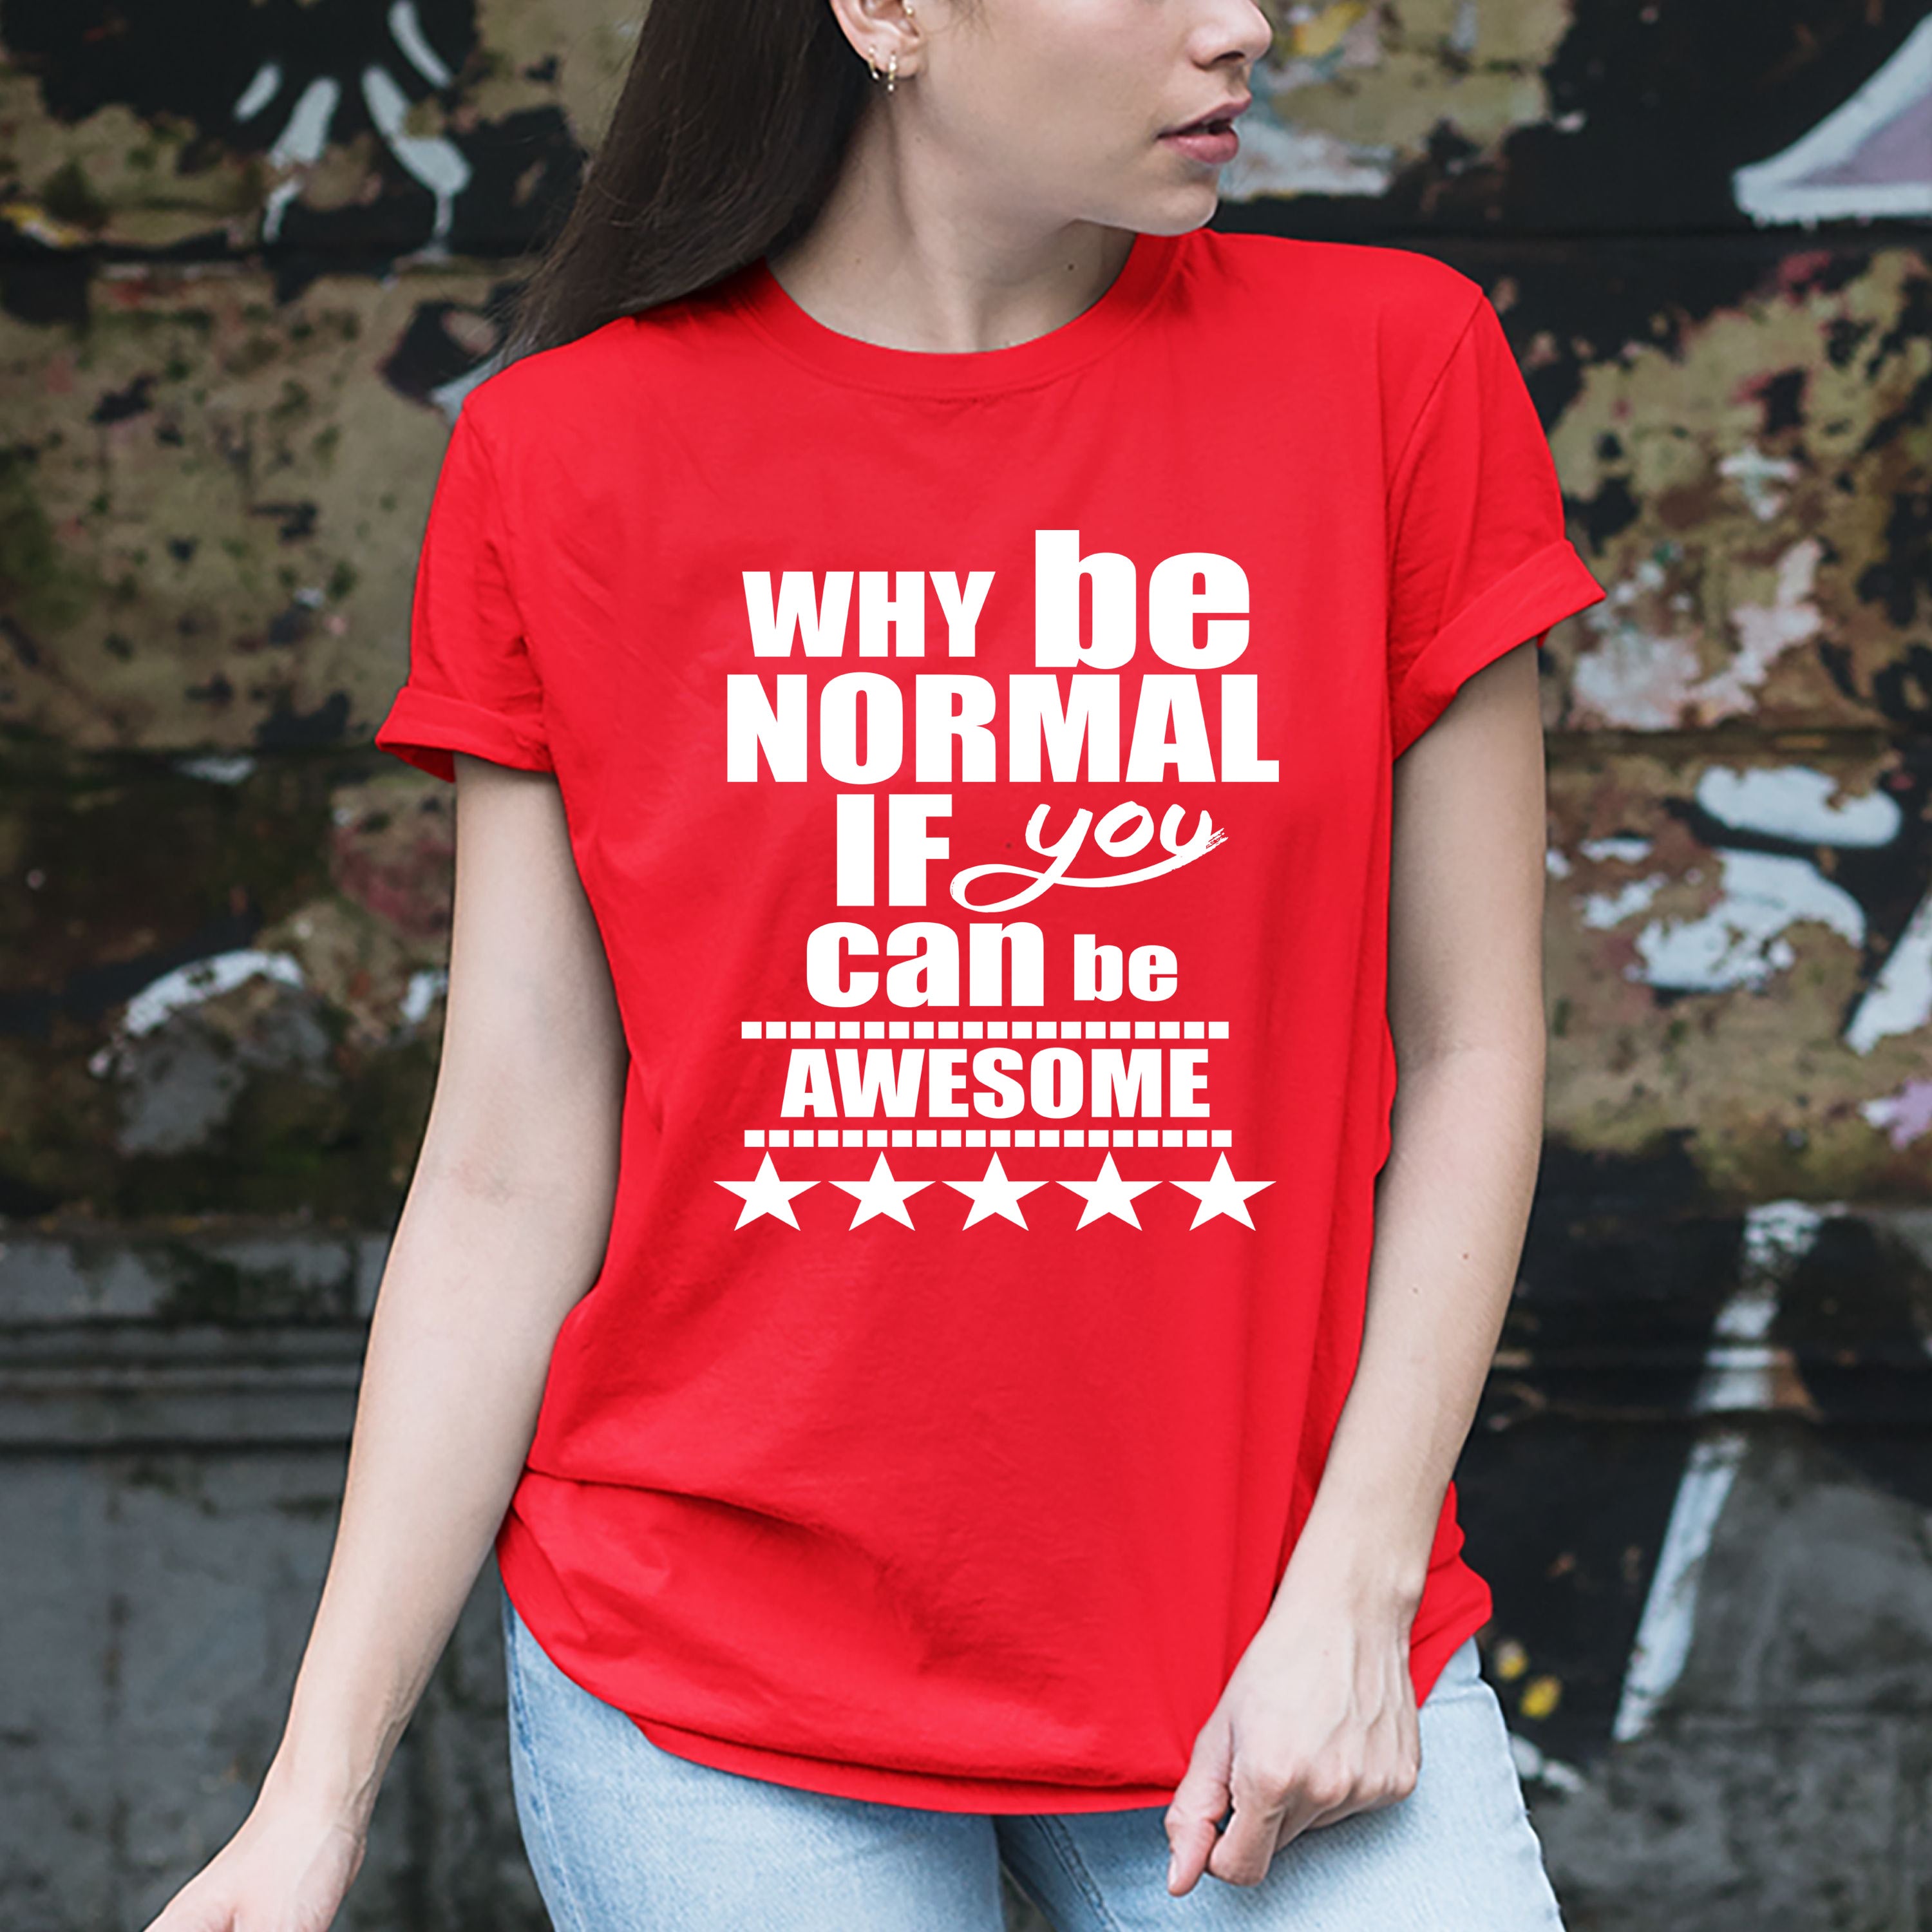 "Can Be Awesome" T-SHIRT